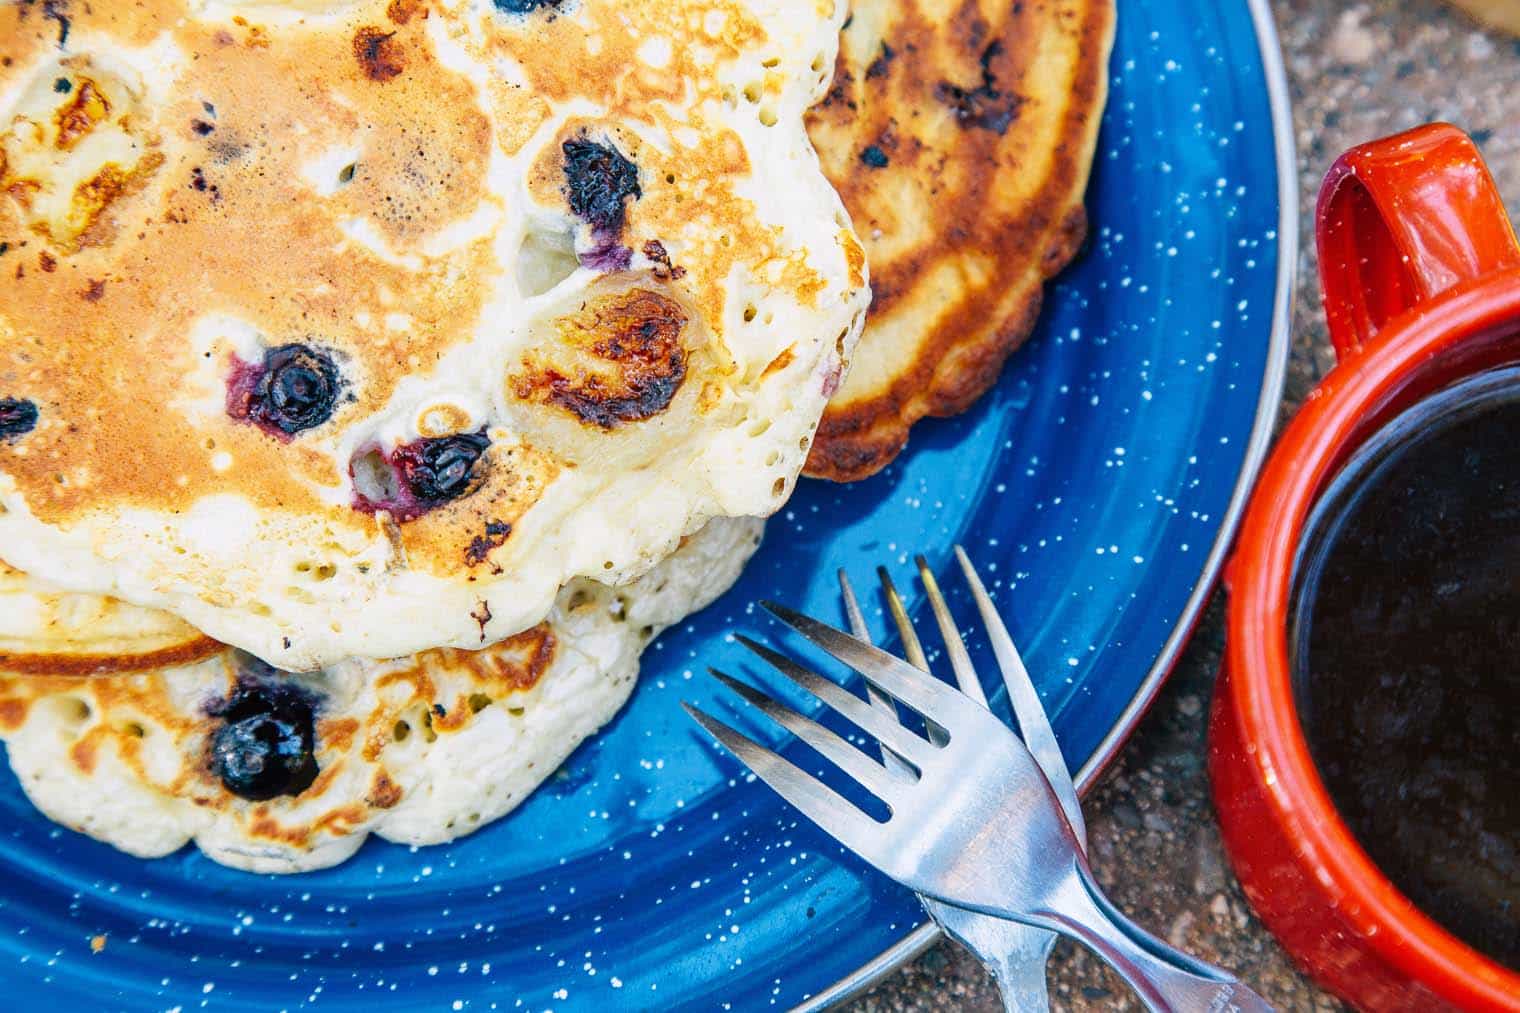 Caramelized bananas and bright blueberries transform a camping breakfast classic.